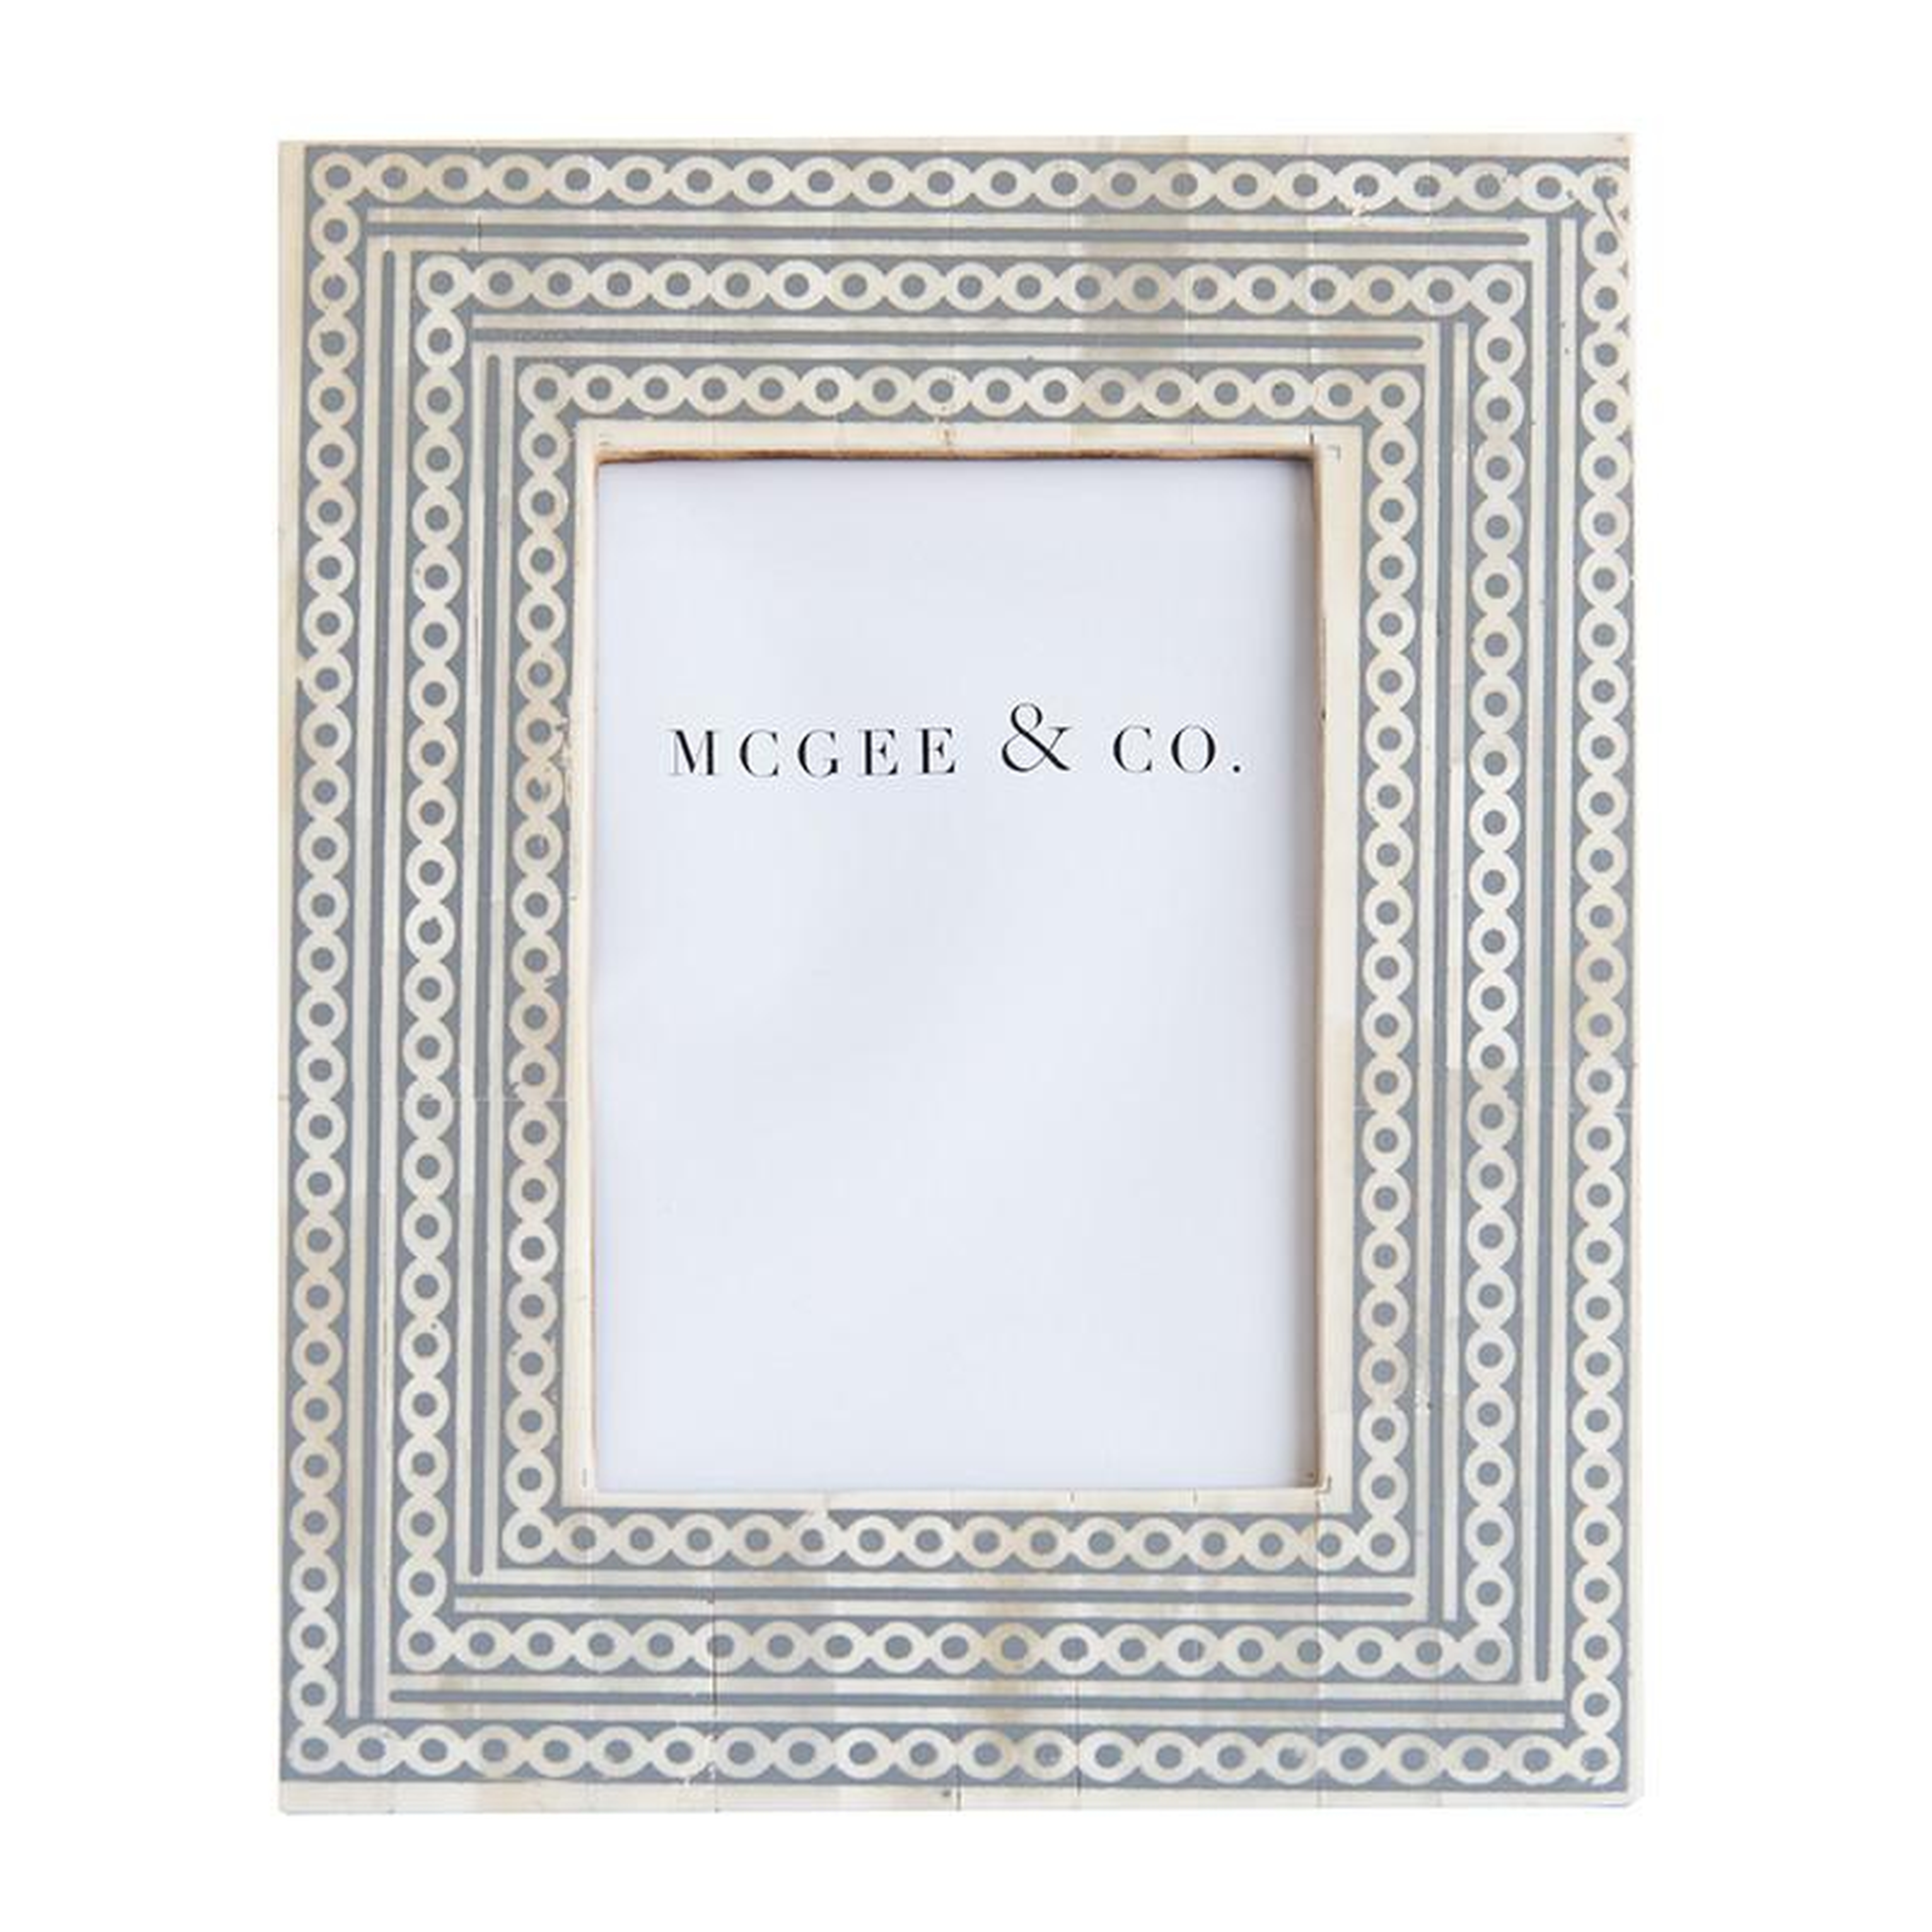 MIDNIGHT PATTERNED FRAME - 5" x 7" - McGee & Co.